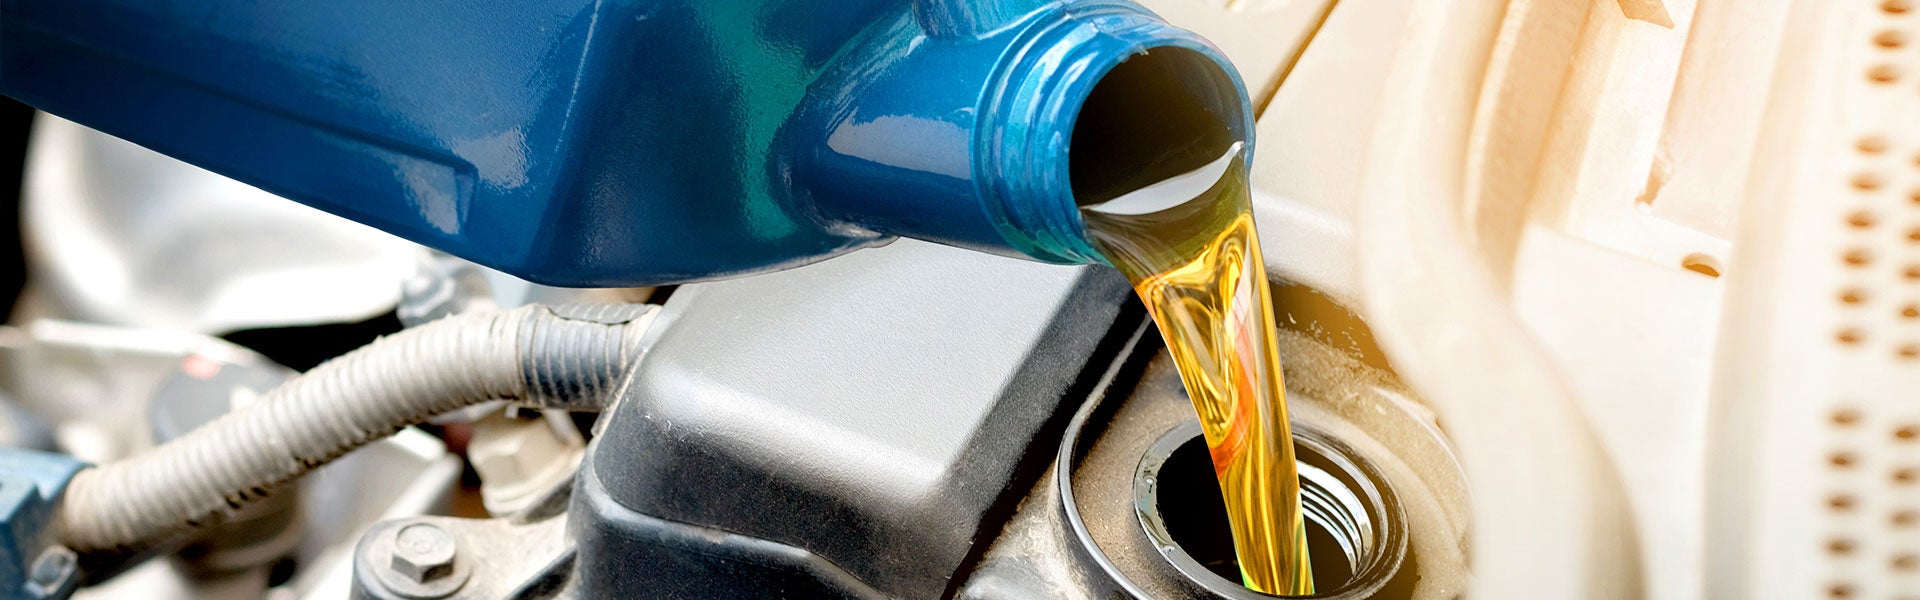 Why an Oil Change is Important | Dale Howard Auto Center of Waverly in Waverly IA